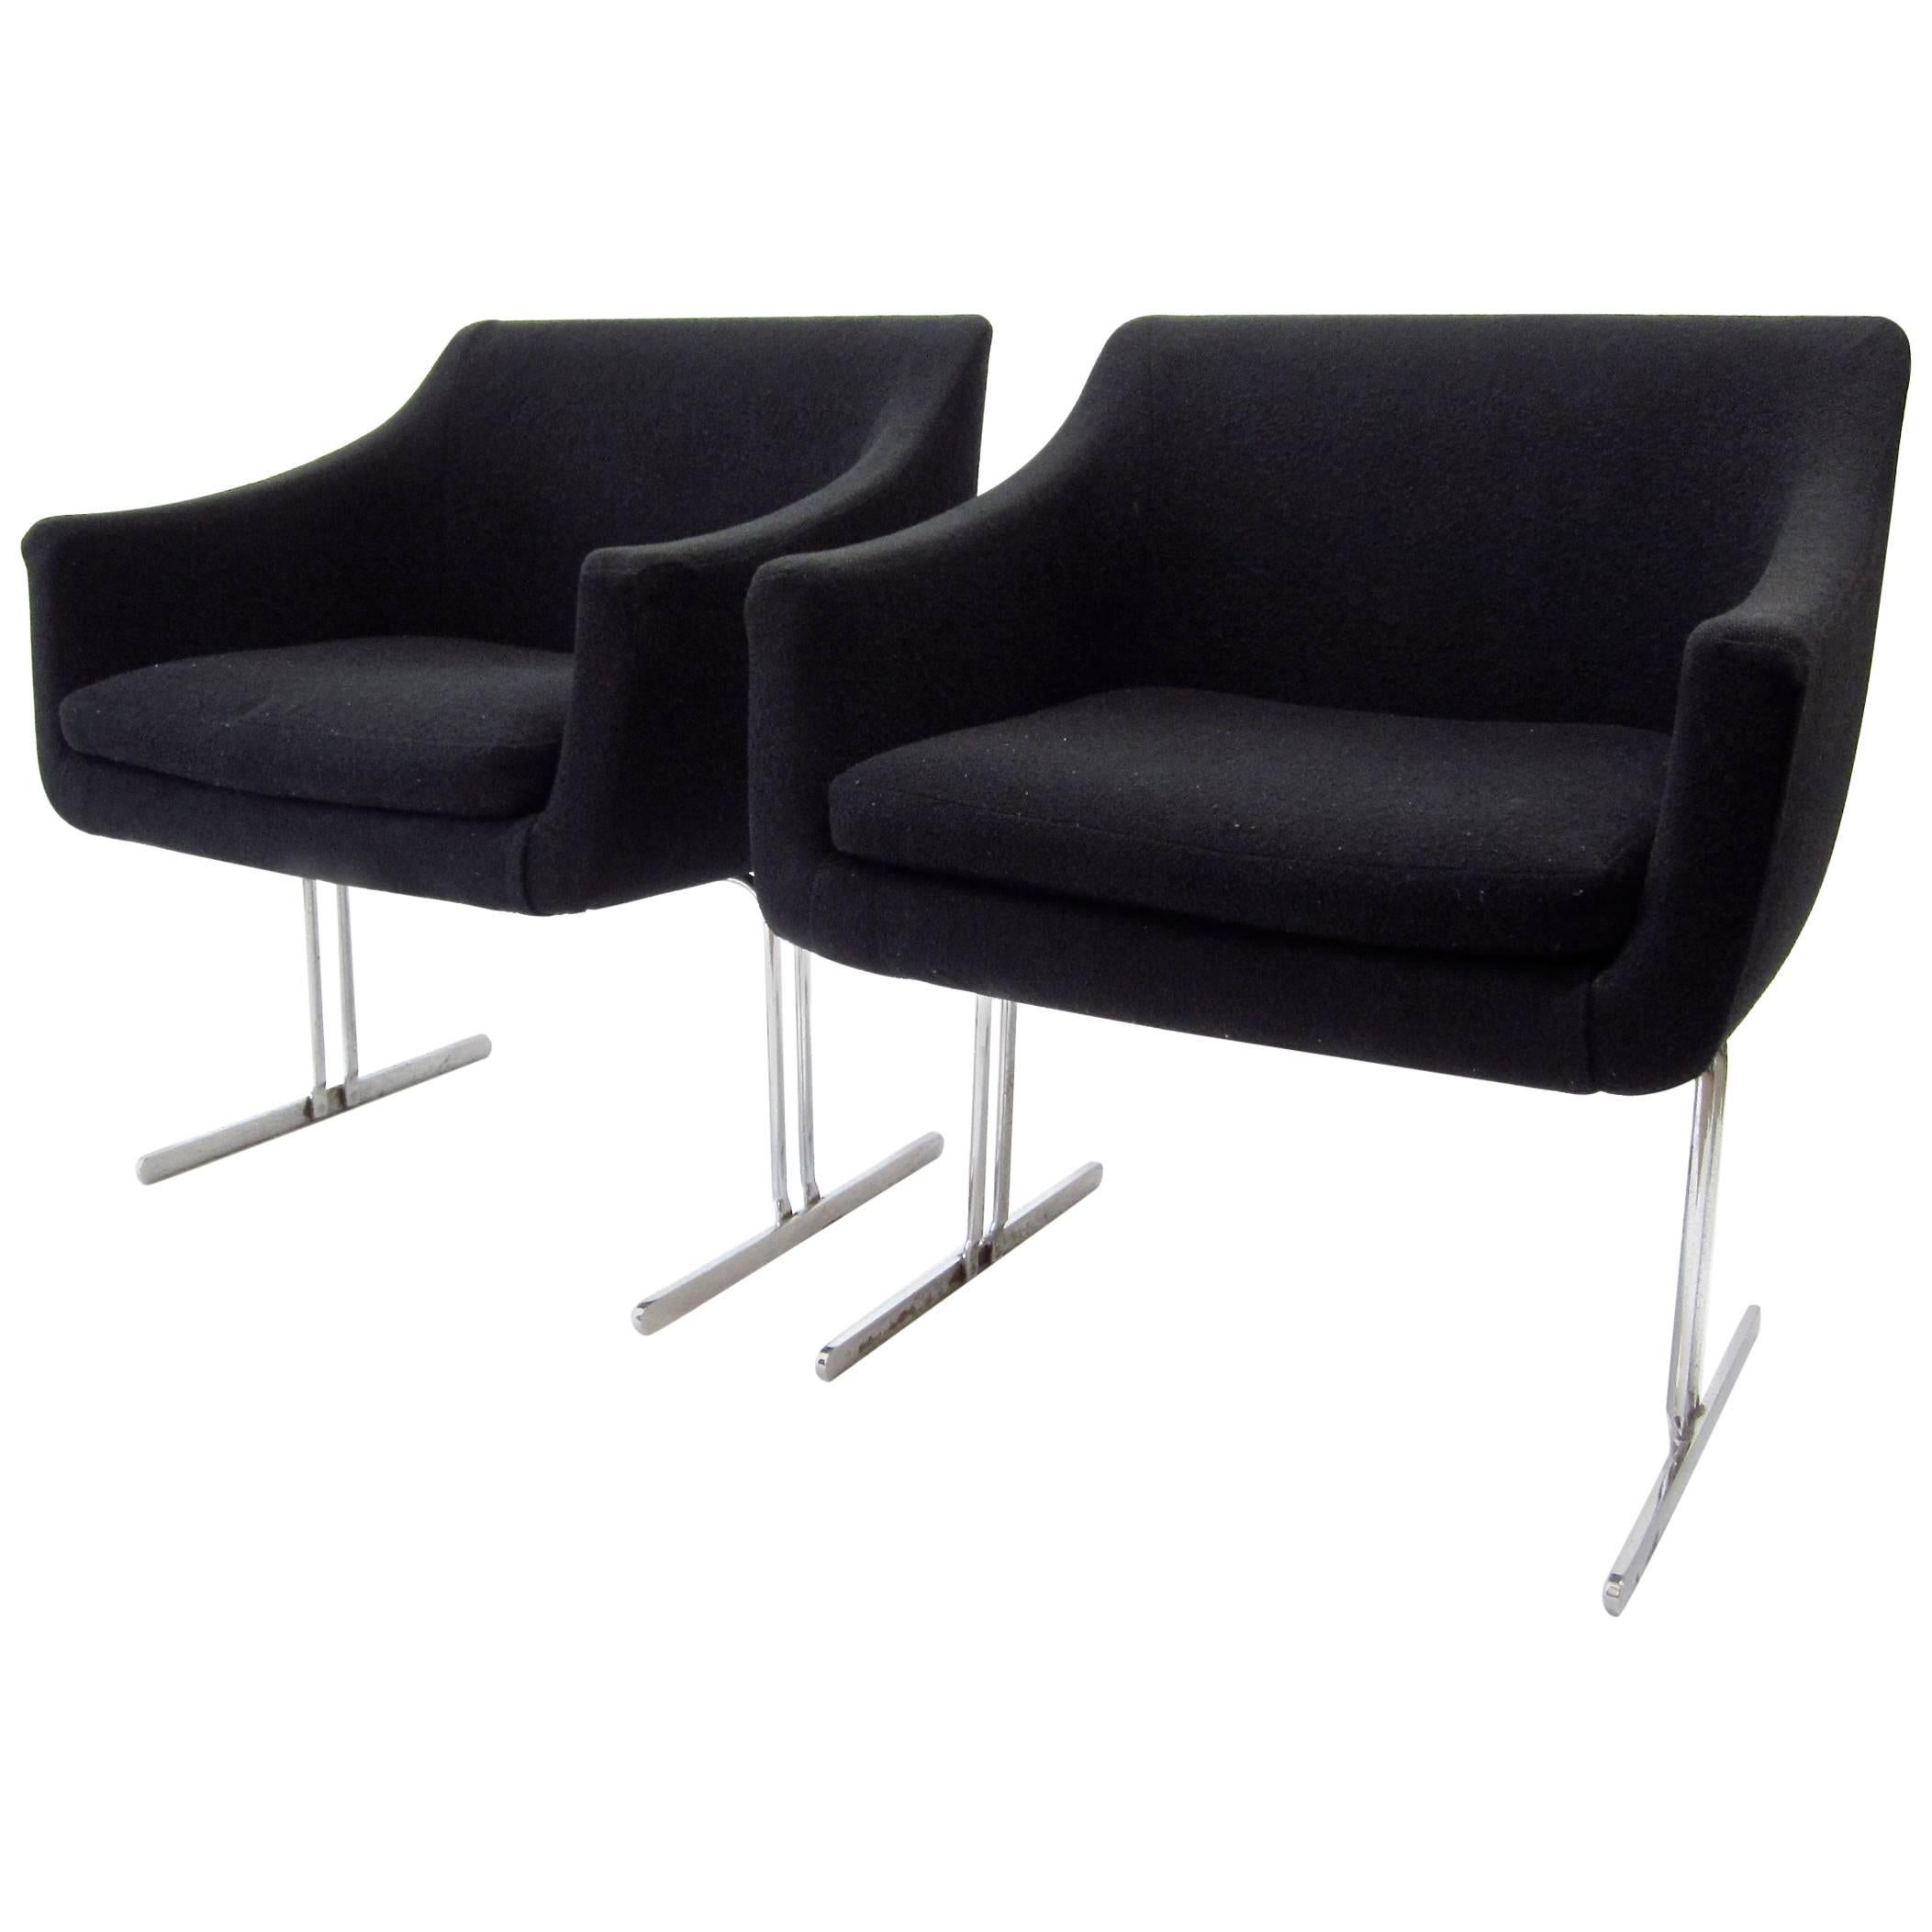 Pair of Hugh Acton Chrome Frame Lounge Chairs For Sale